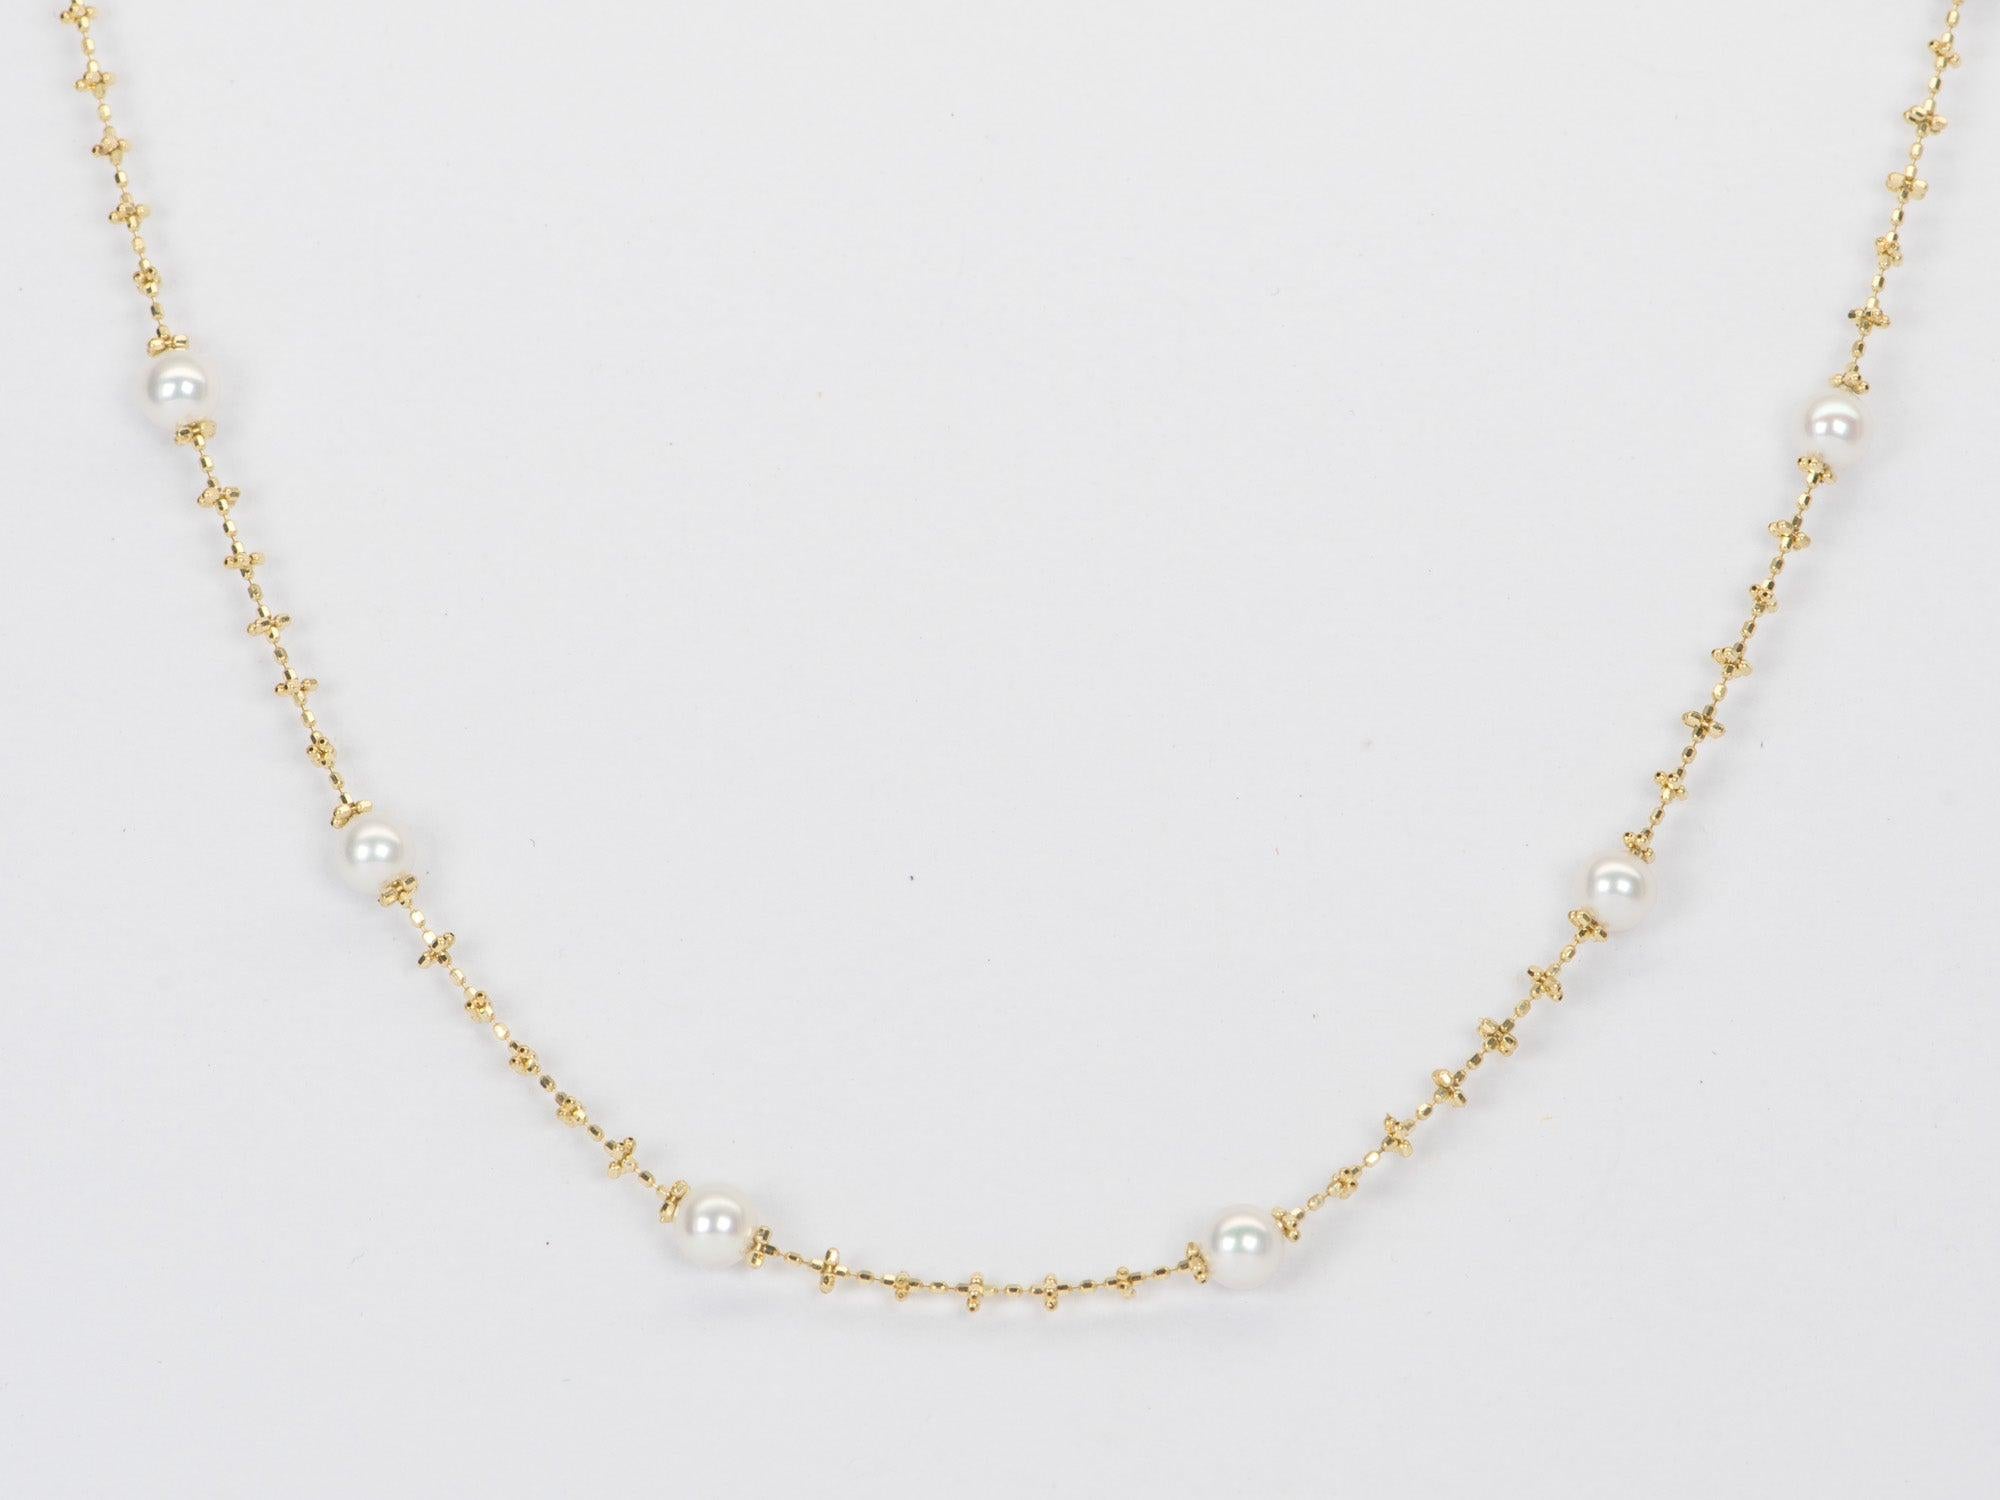 ♥ This is a beautiful dainty freshwater pearl station necklace with alternating small and large sized pearls on a 18k yellow gold chain

♥ This necklace is fully adjustable as the spring ring can hook onto any pearl stations
♥ The chain measures